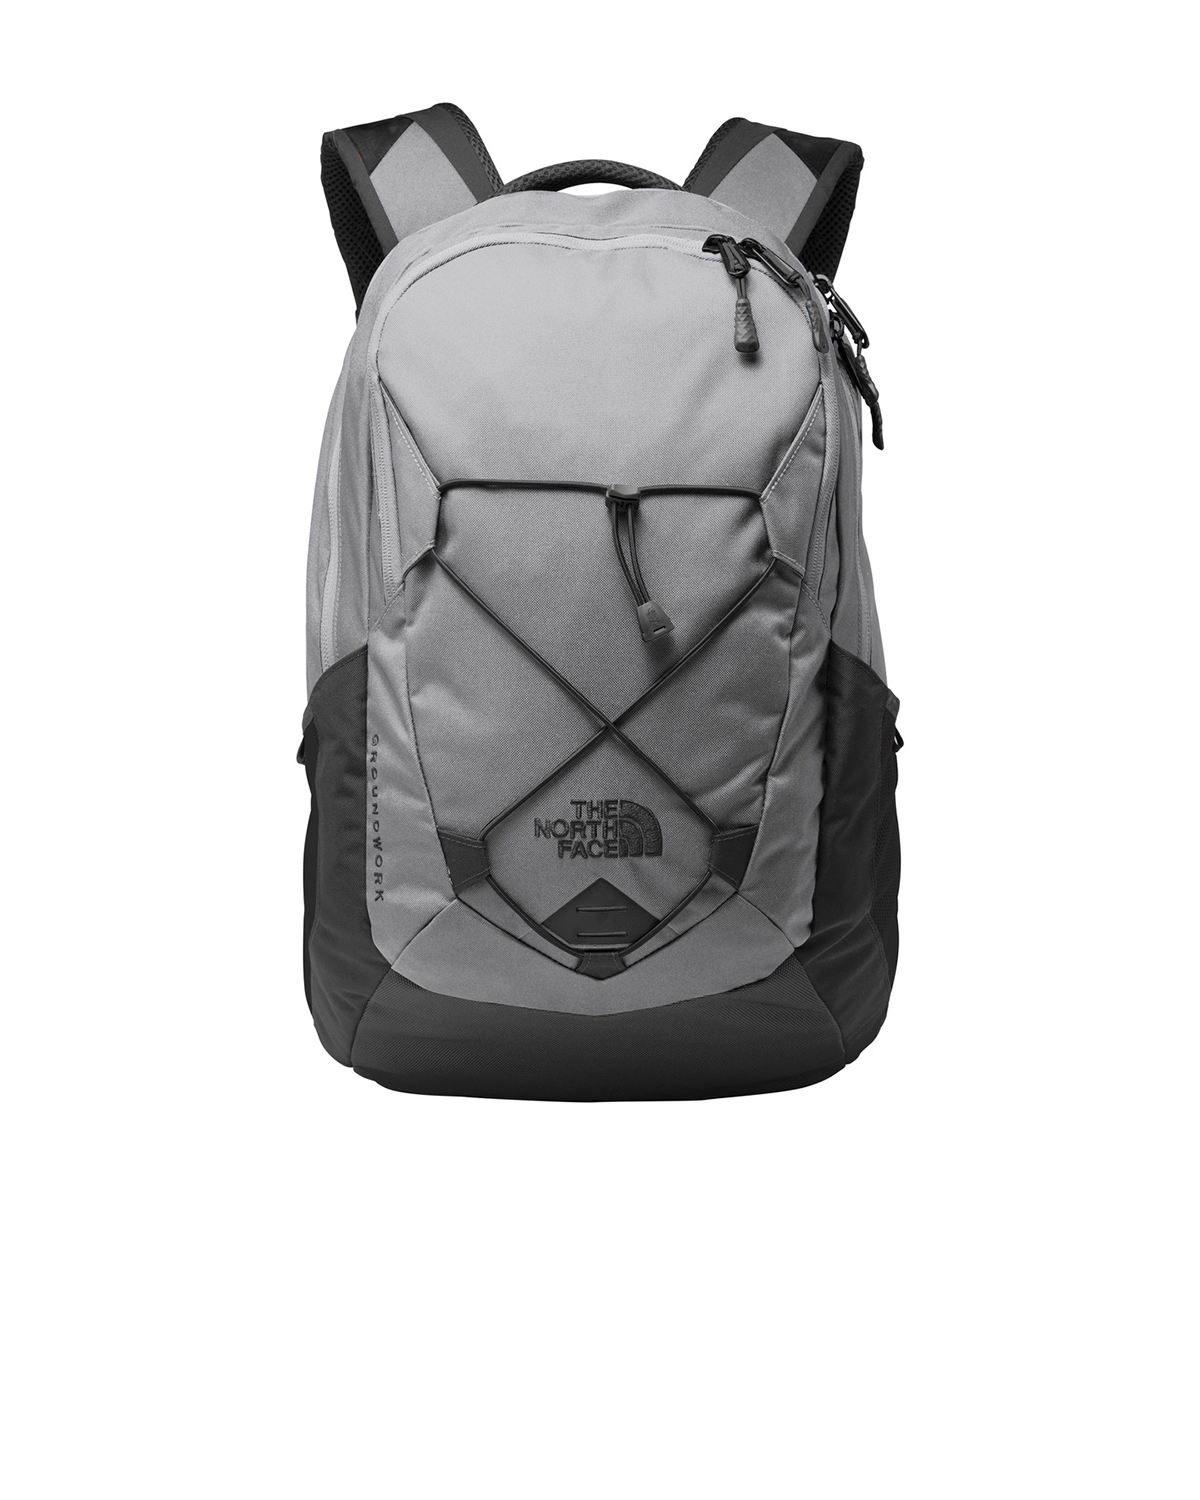 'The North Face NF0A3KX6 Groundwork Backpack'